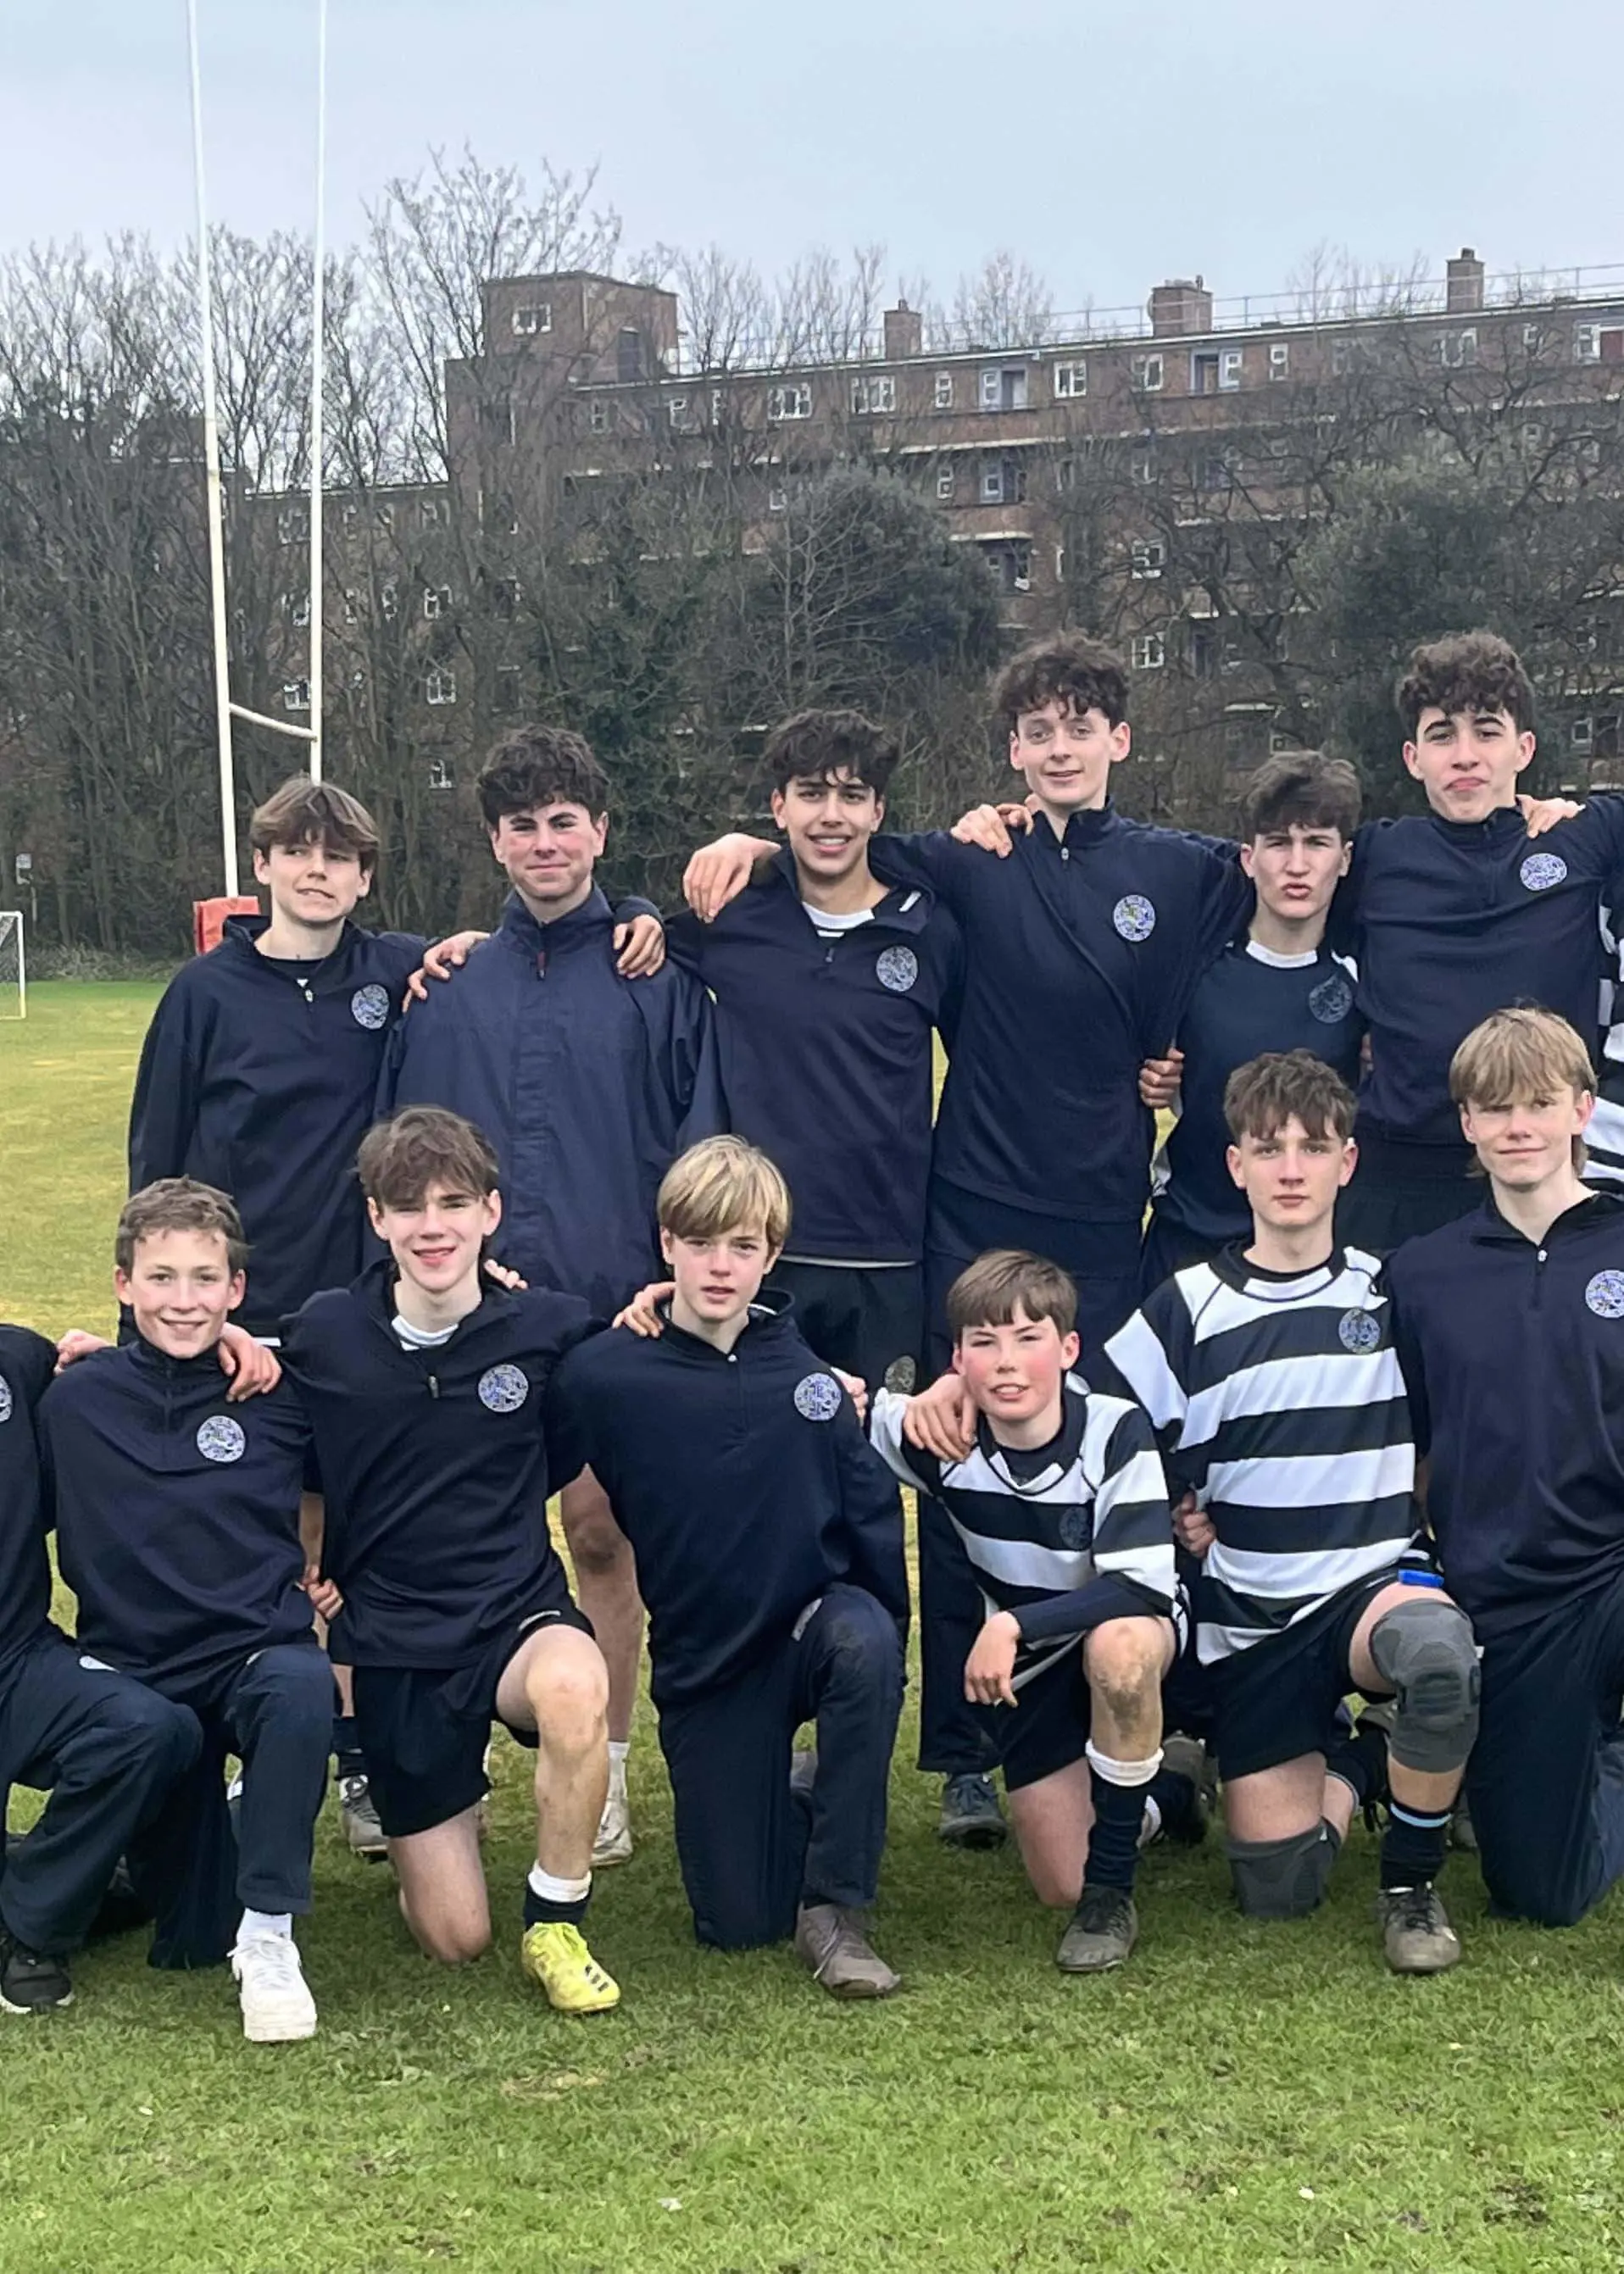 Senior boys rugby team photo at Ibstock Place School, a private school near Richmond, Barnes, Putney, Kingston, and Wandsworth.